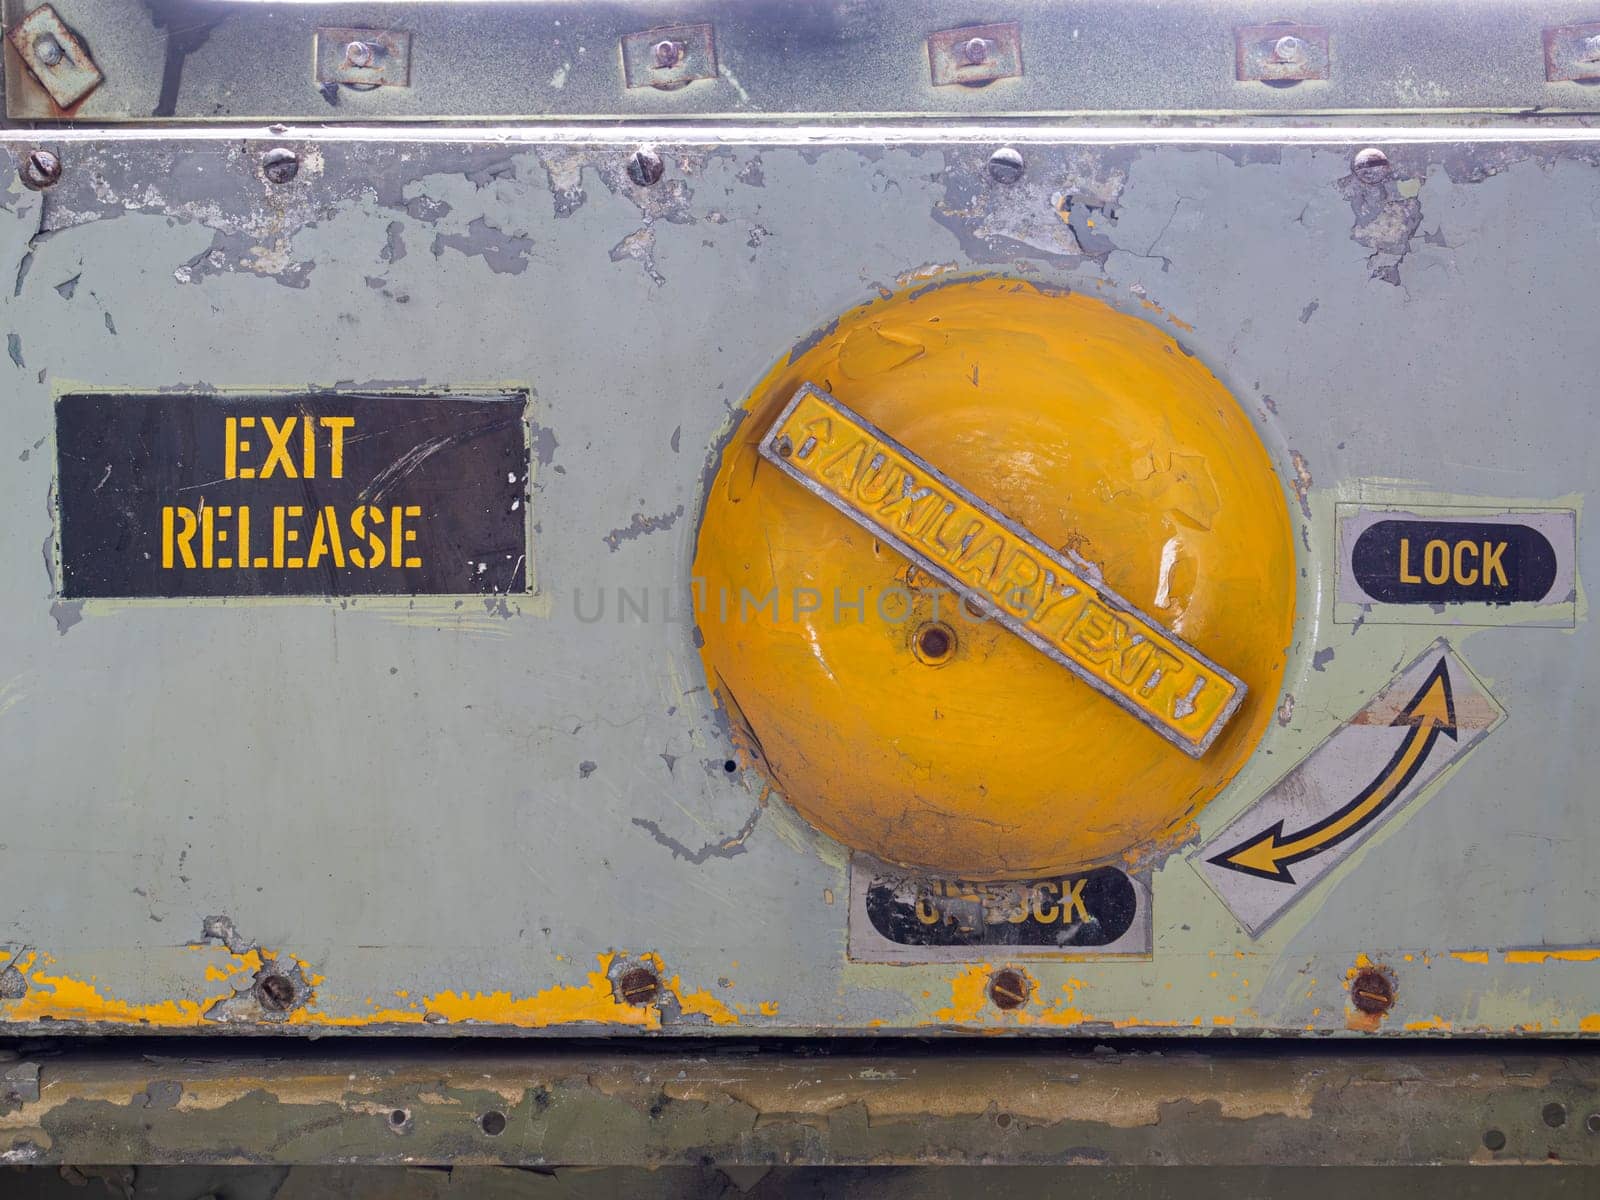 Image of old and rusty emergency exit release lock airplane mechanism